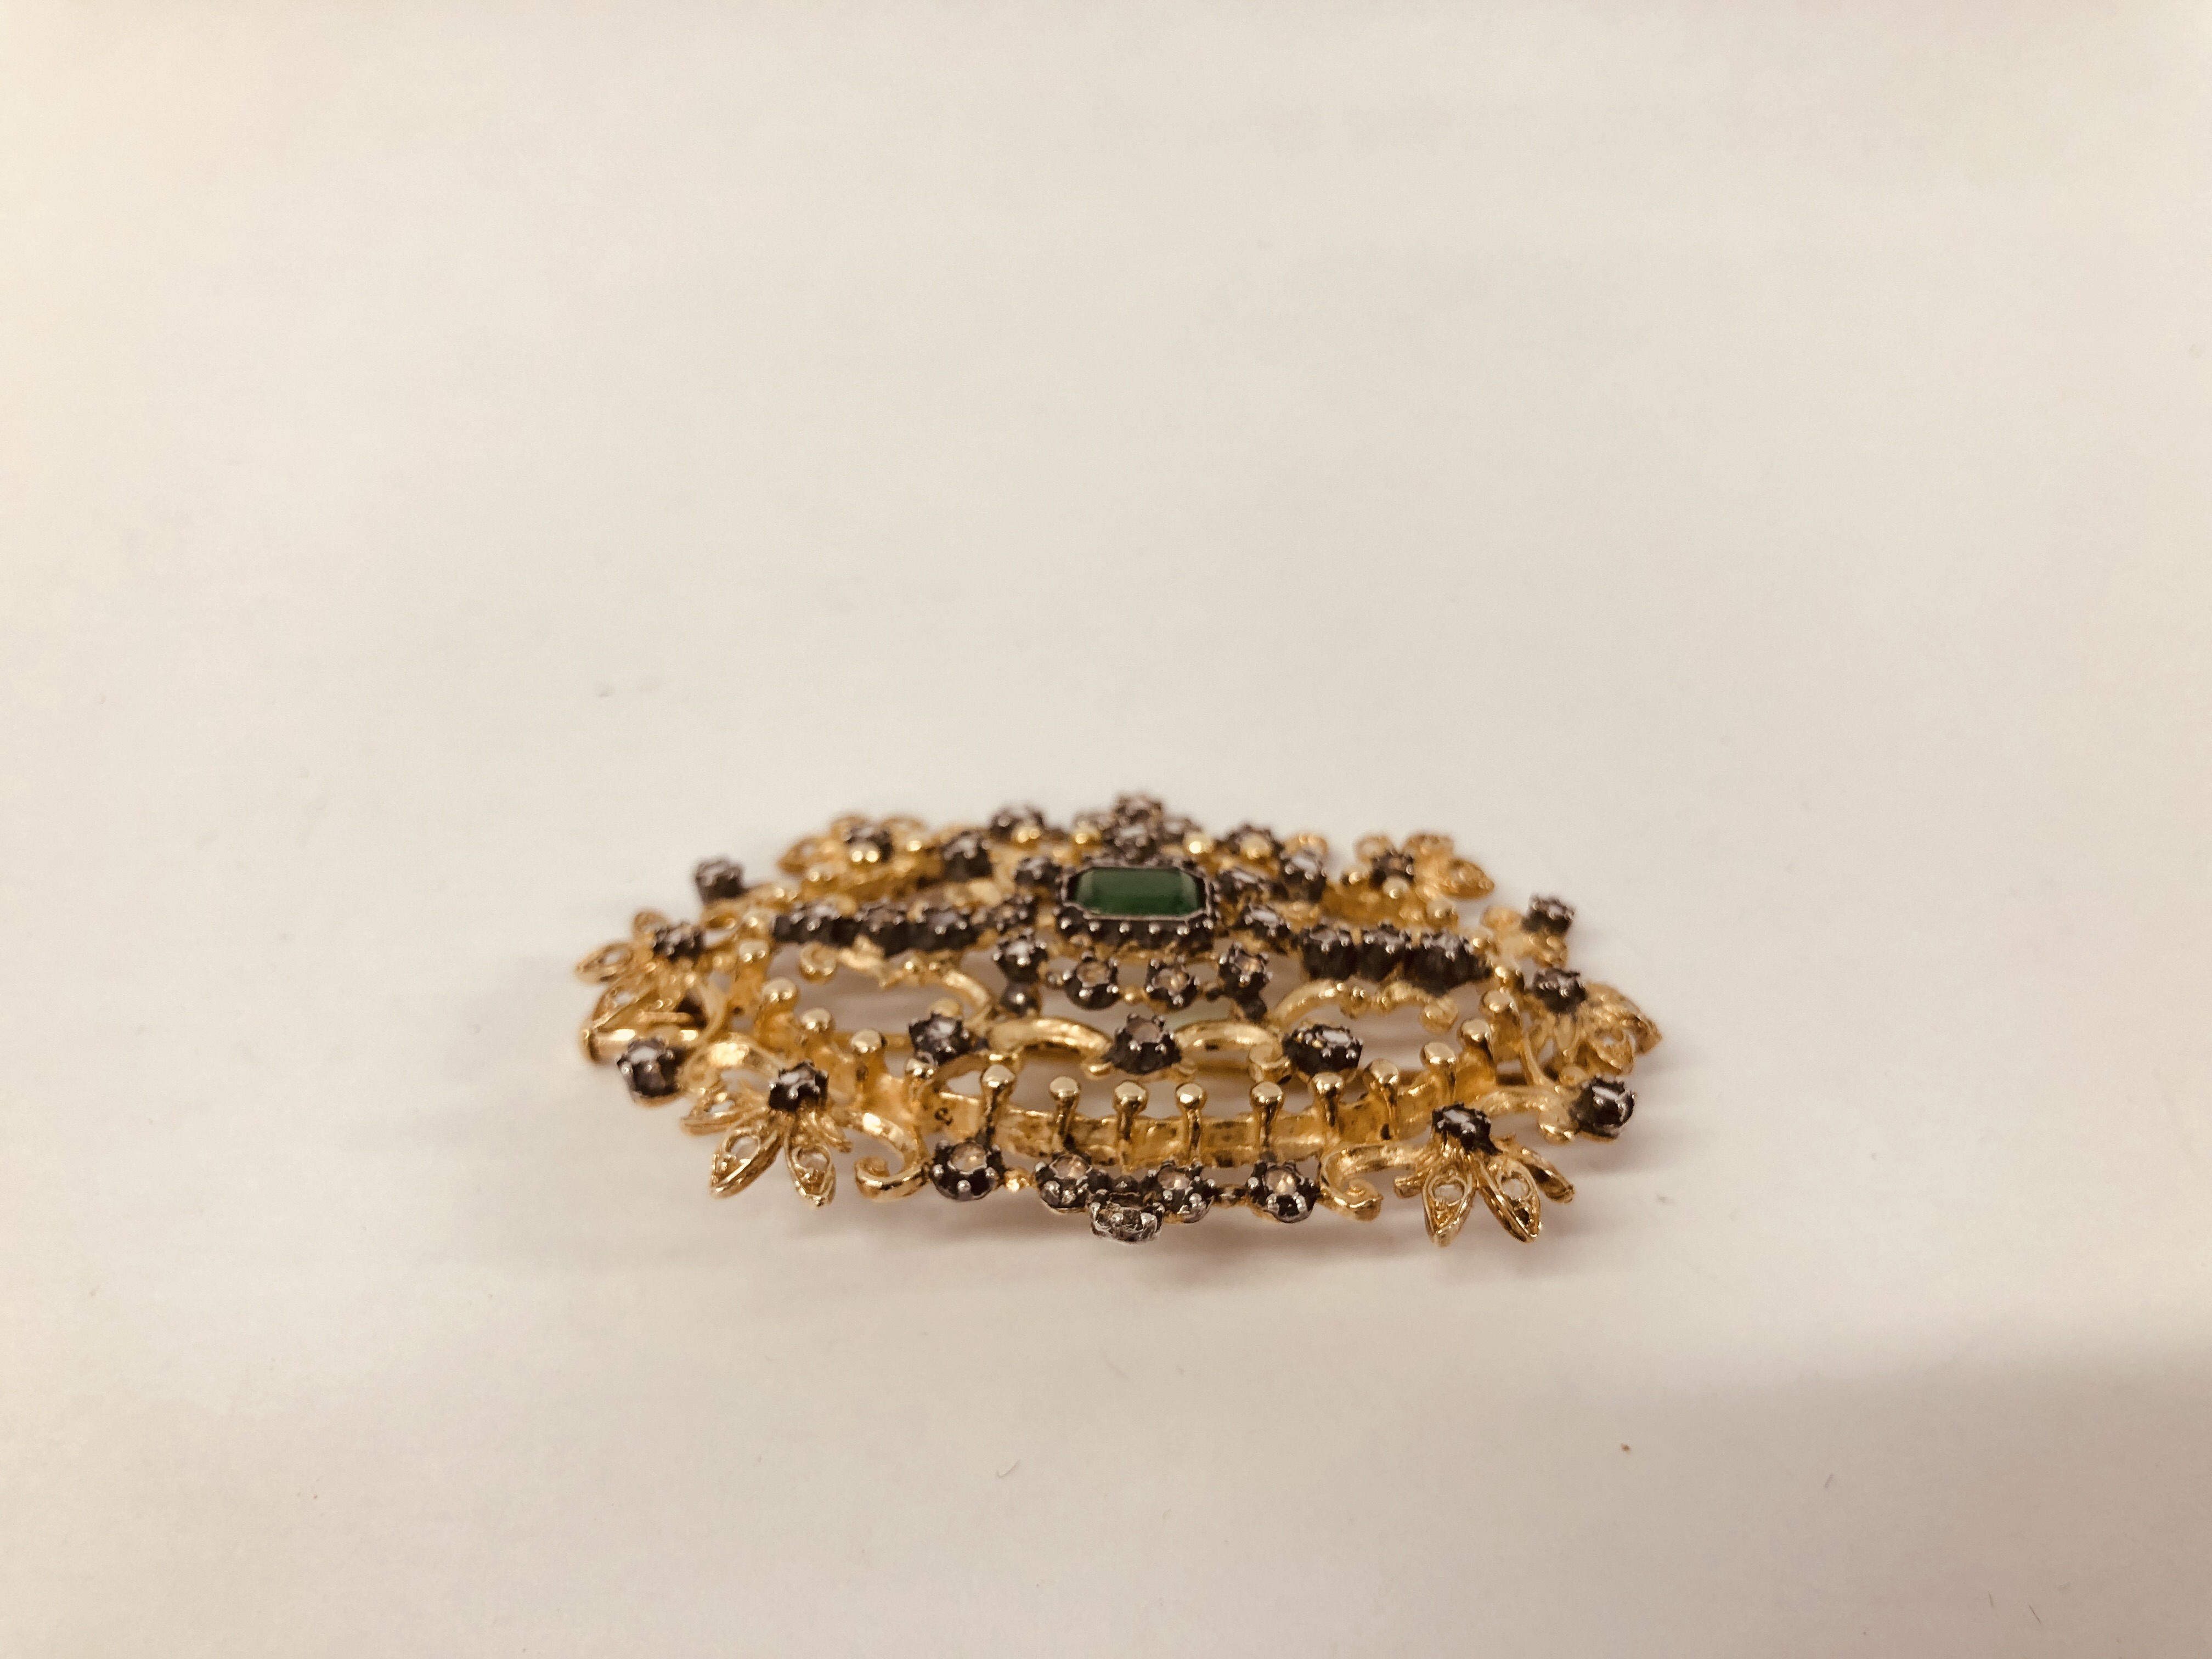 DESIGNER GILT BROOCH SET WITH CENTRAL GREEN STONE AND MULTIPLE CLEAR STONES, MARKED "ART JOY". - Image 4 of 5